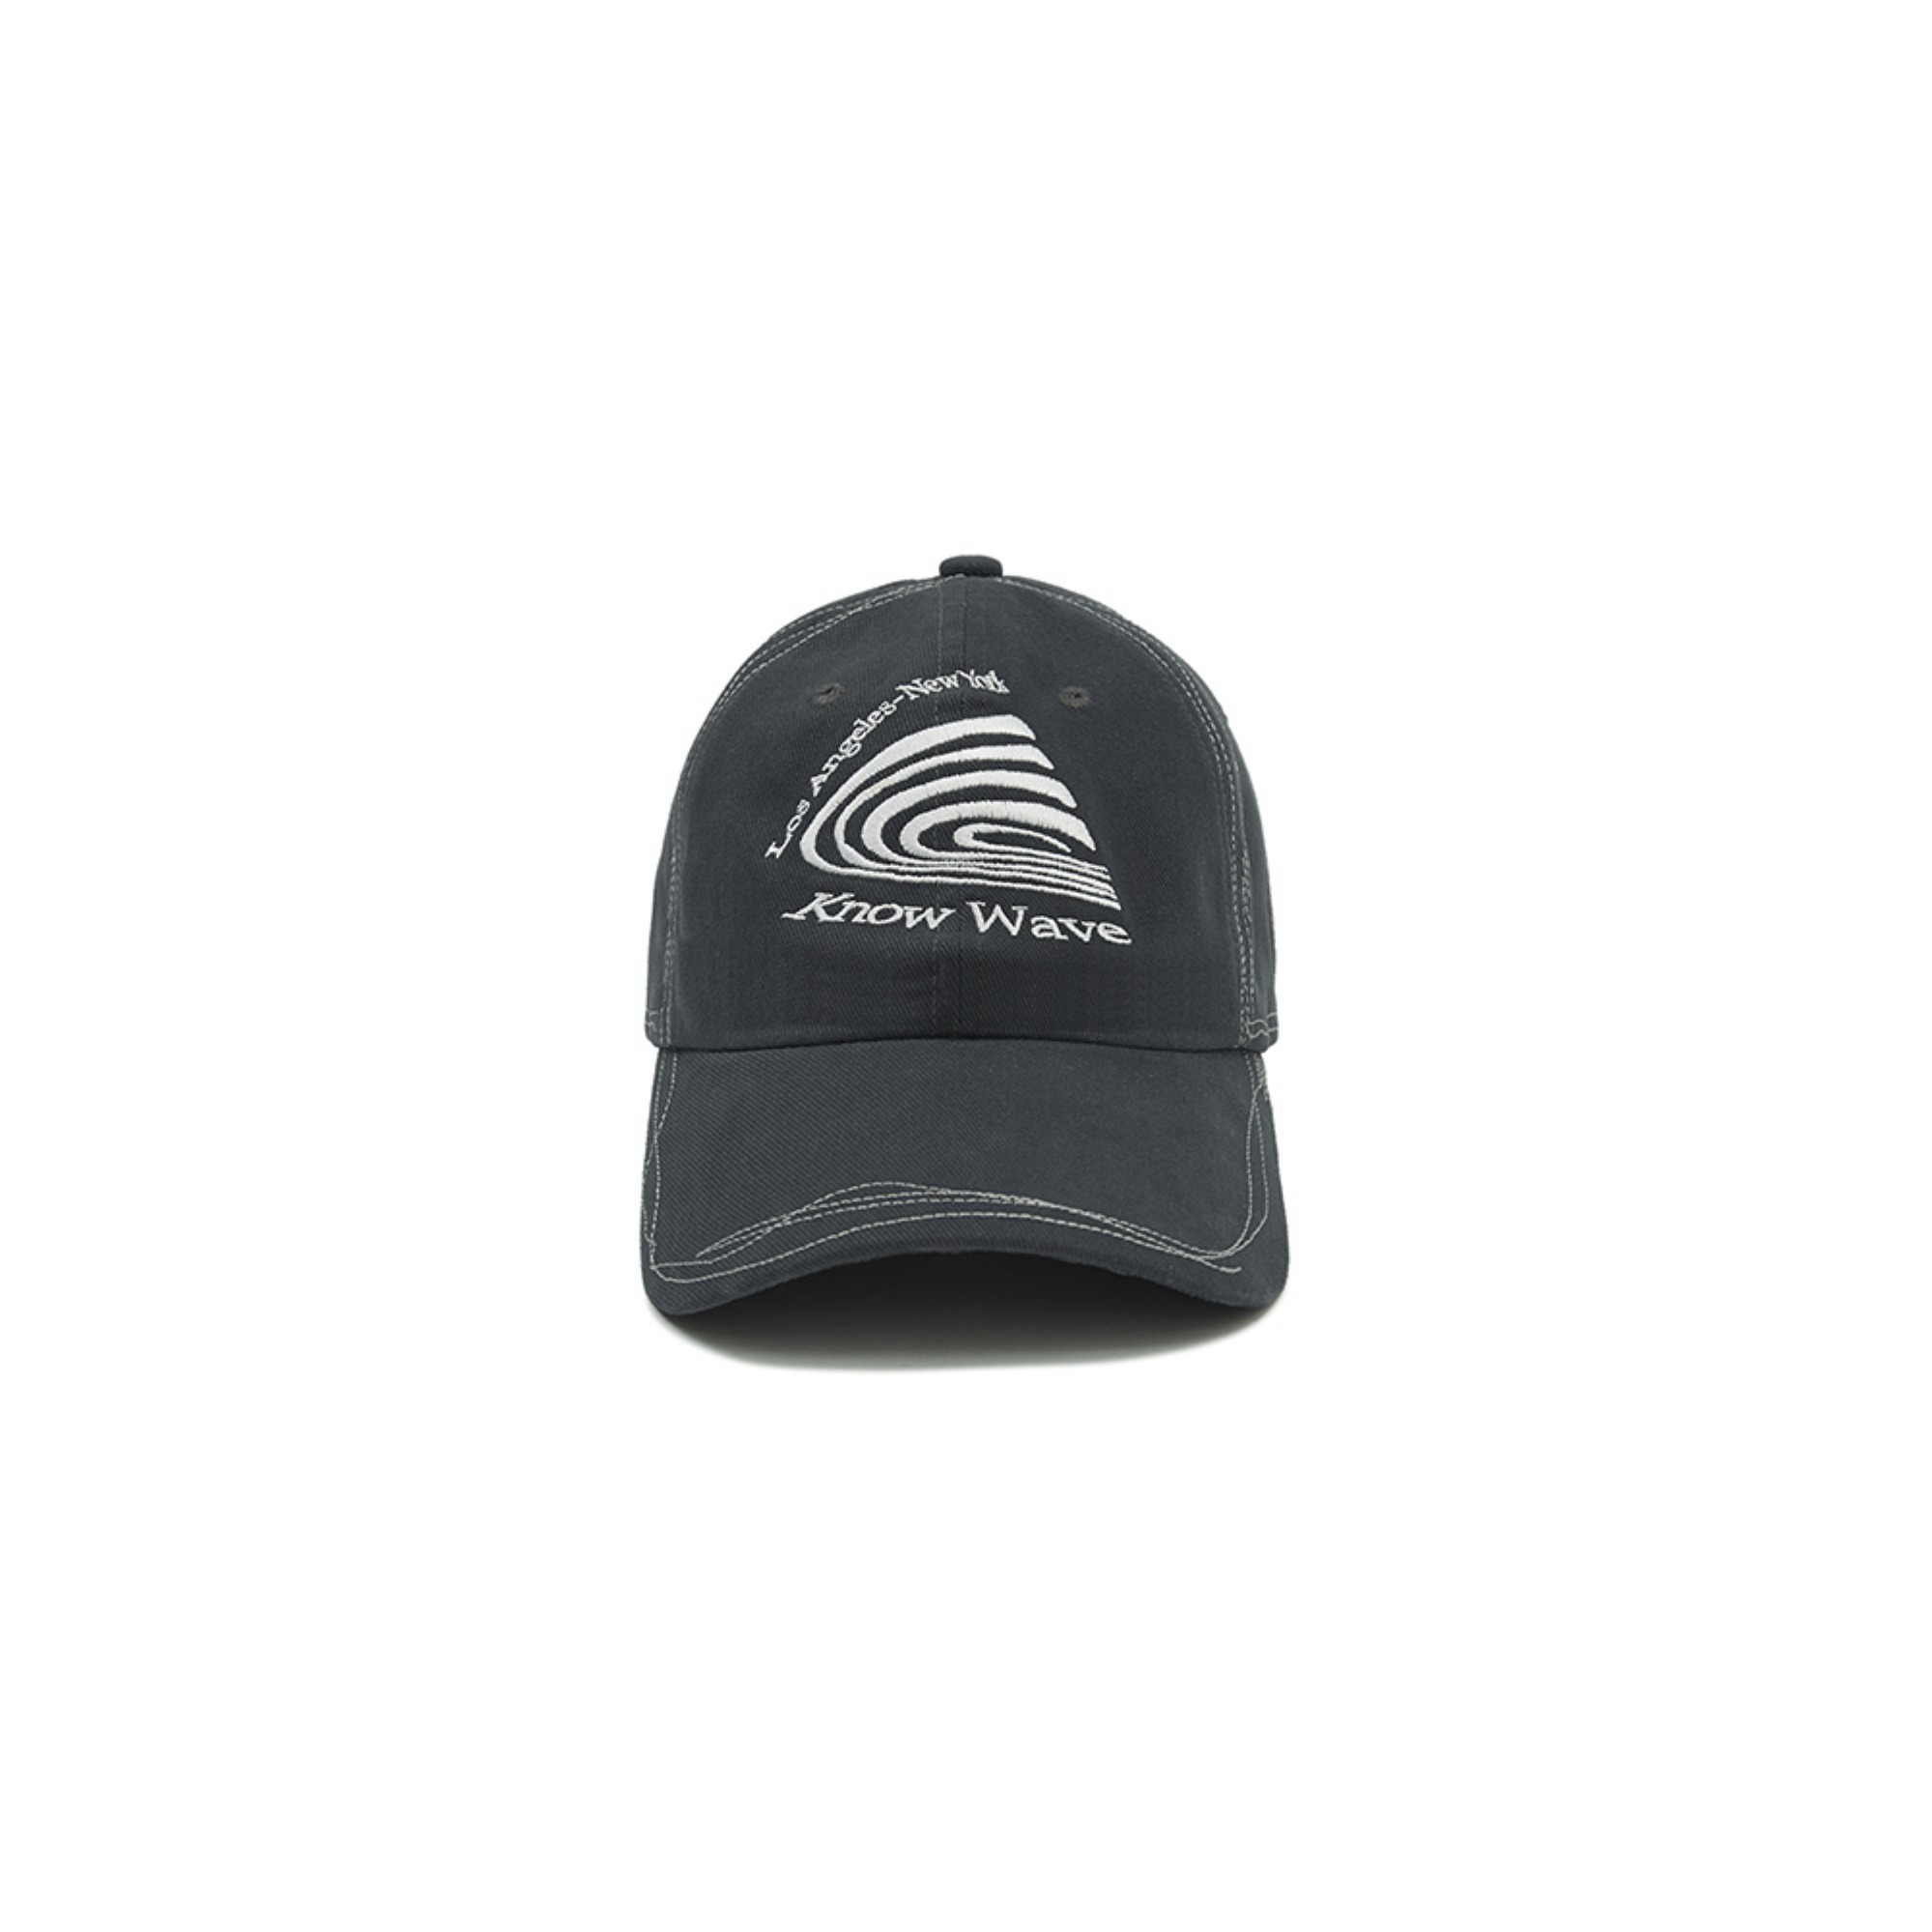 KNOW WAVE LOGO RECORD BALL CAP KNA012m(CHARCOAL)